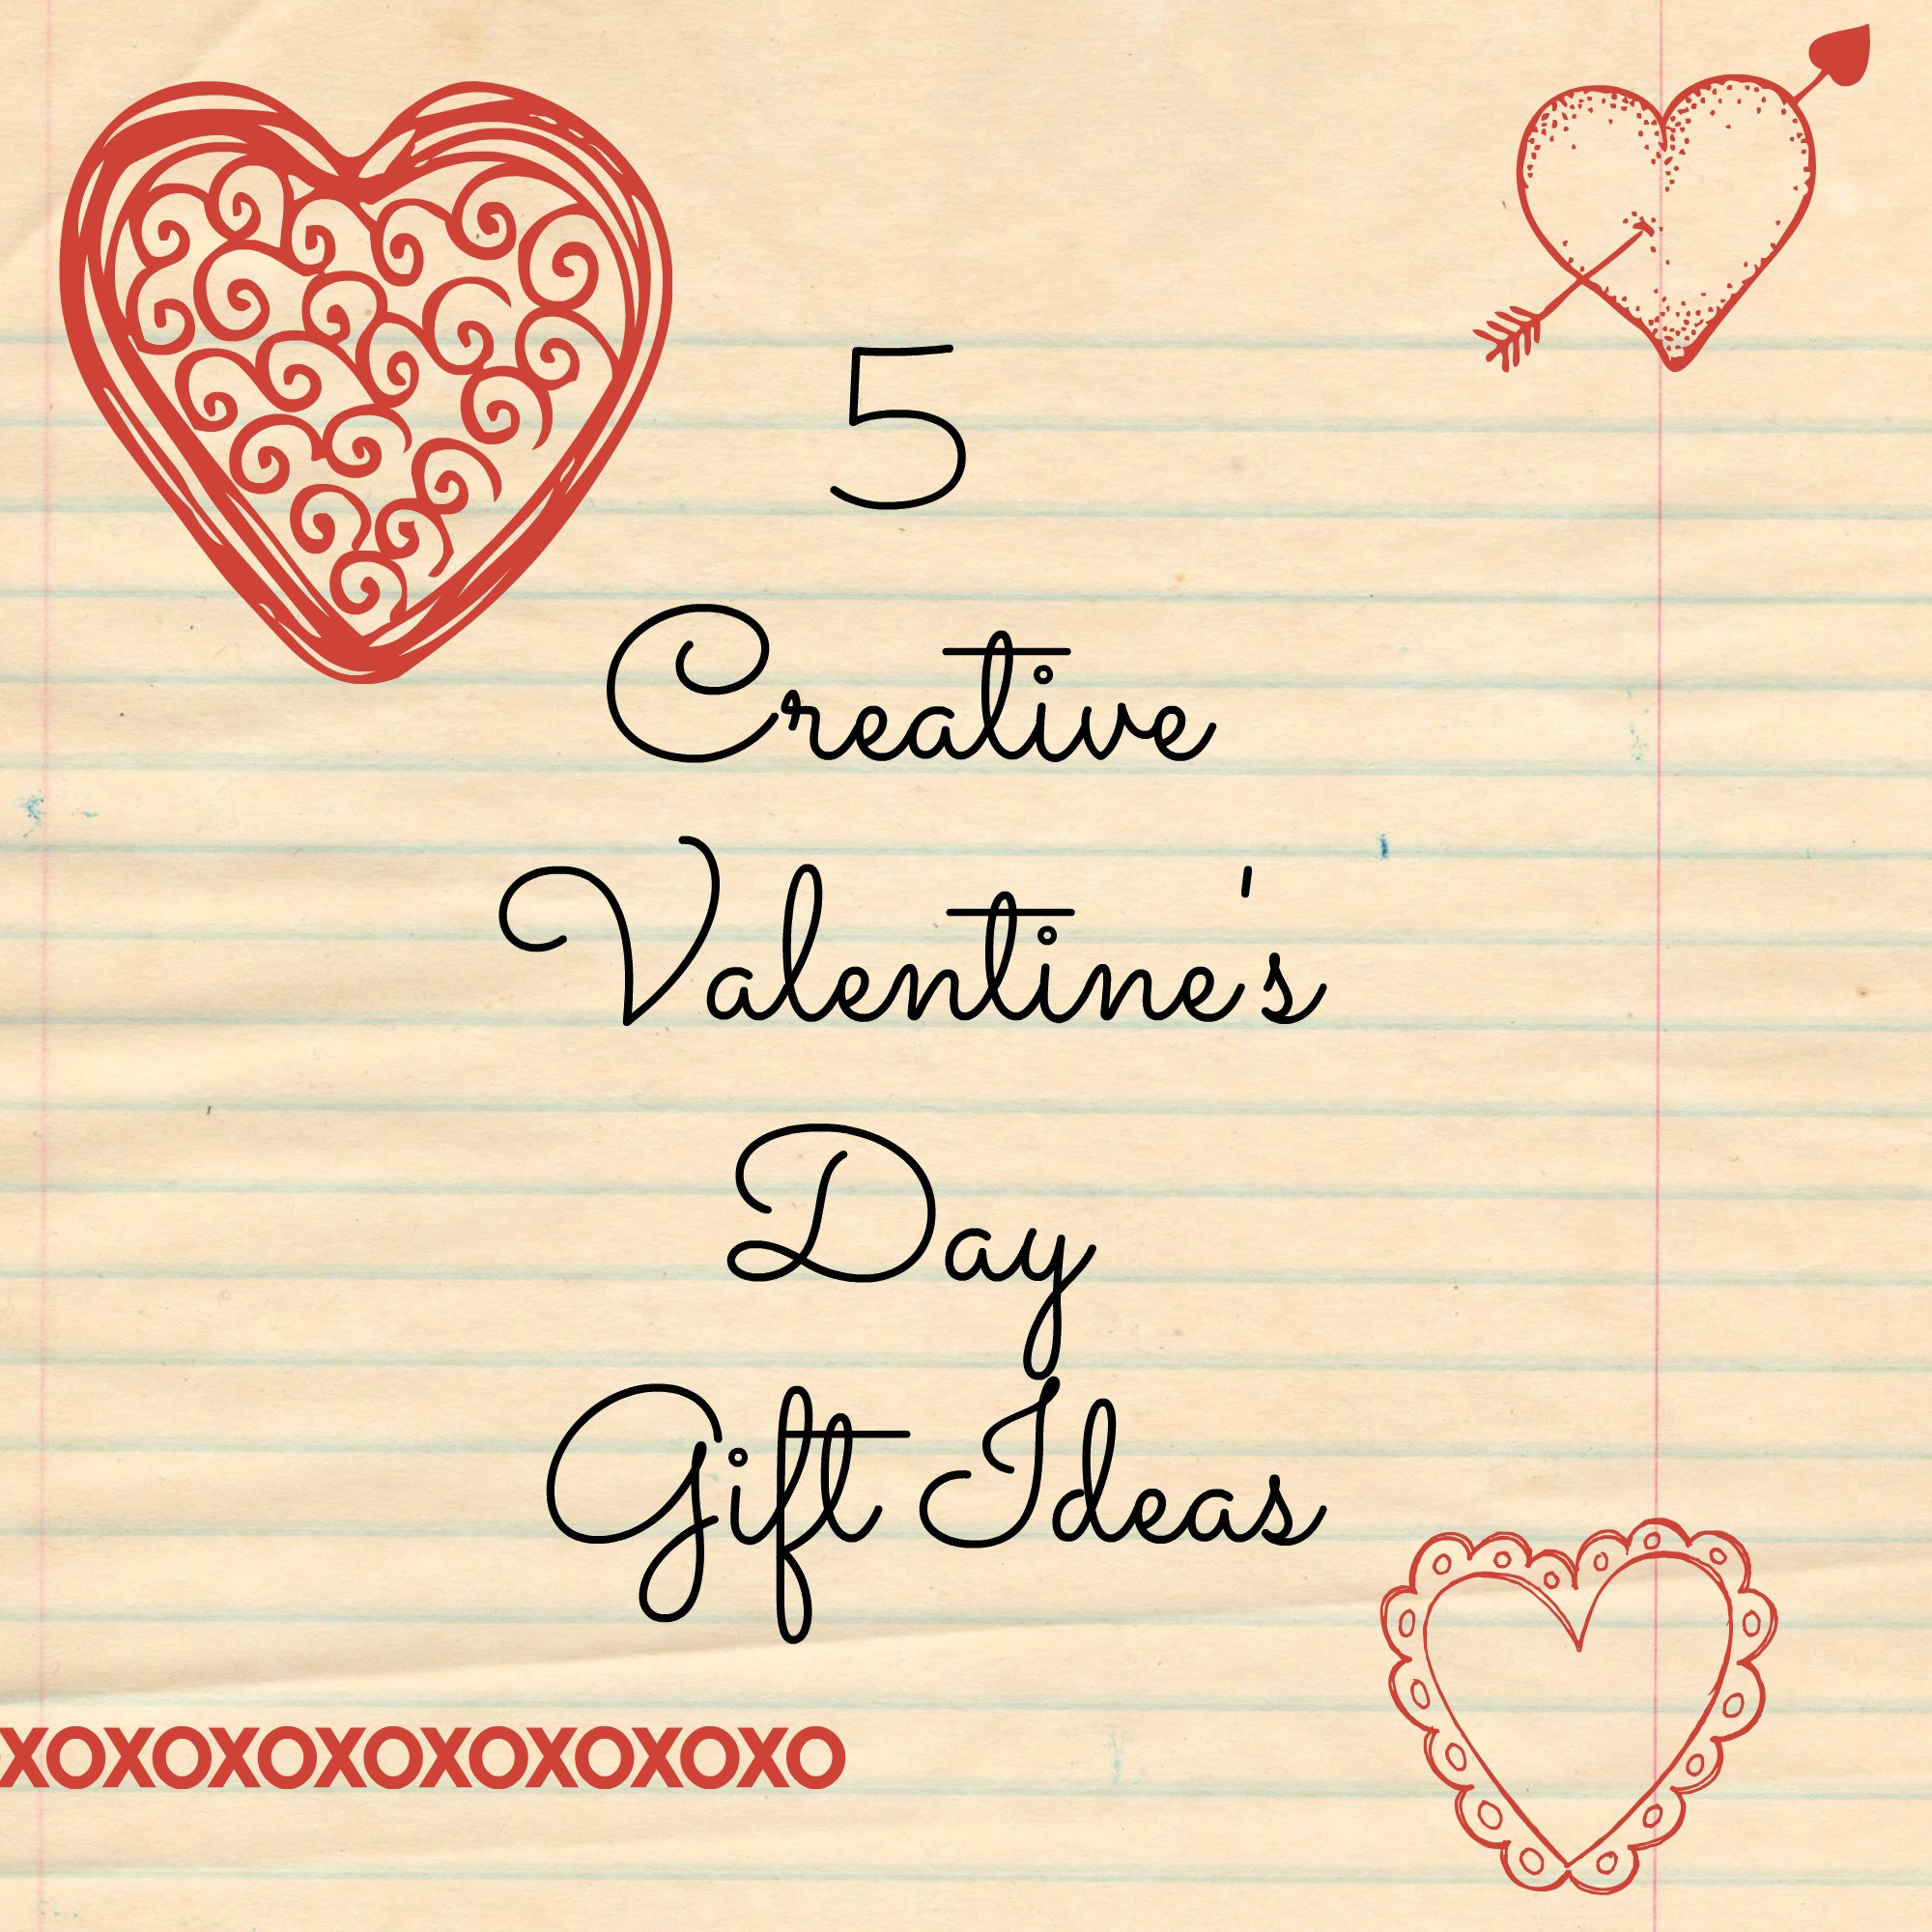 Best ideas about Valentine Day Creative Gift Ideas
. Save or Pin 5 Creative Valentine’s Day Gift Ideas Thrill of the Chases Now.